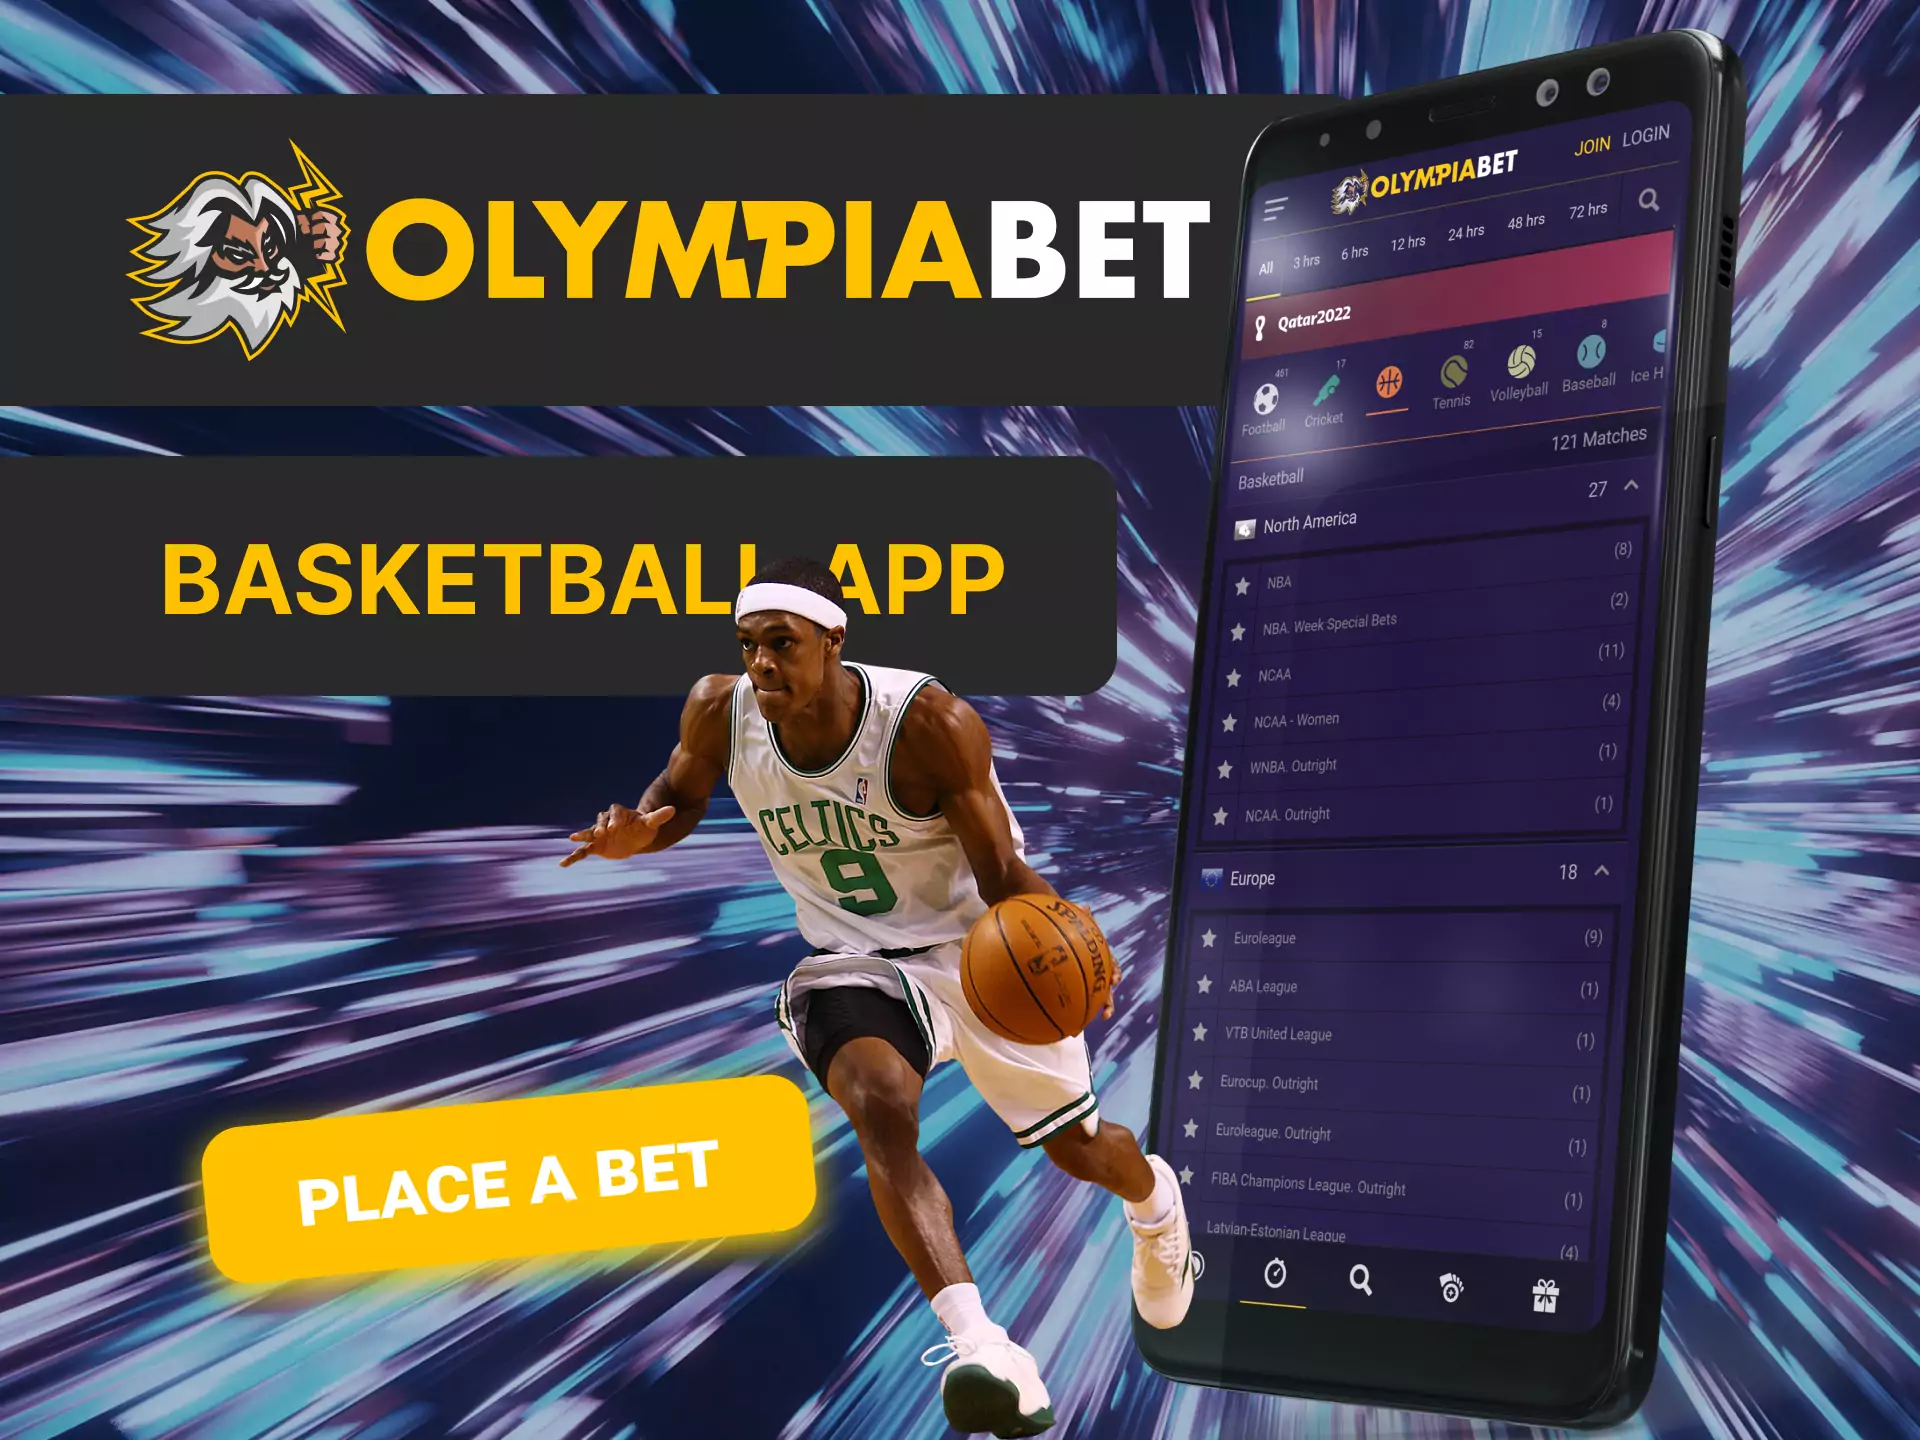 If you like basketball, place bets in OlympiaBet on your favorite teams.